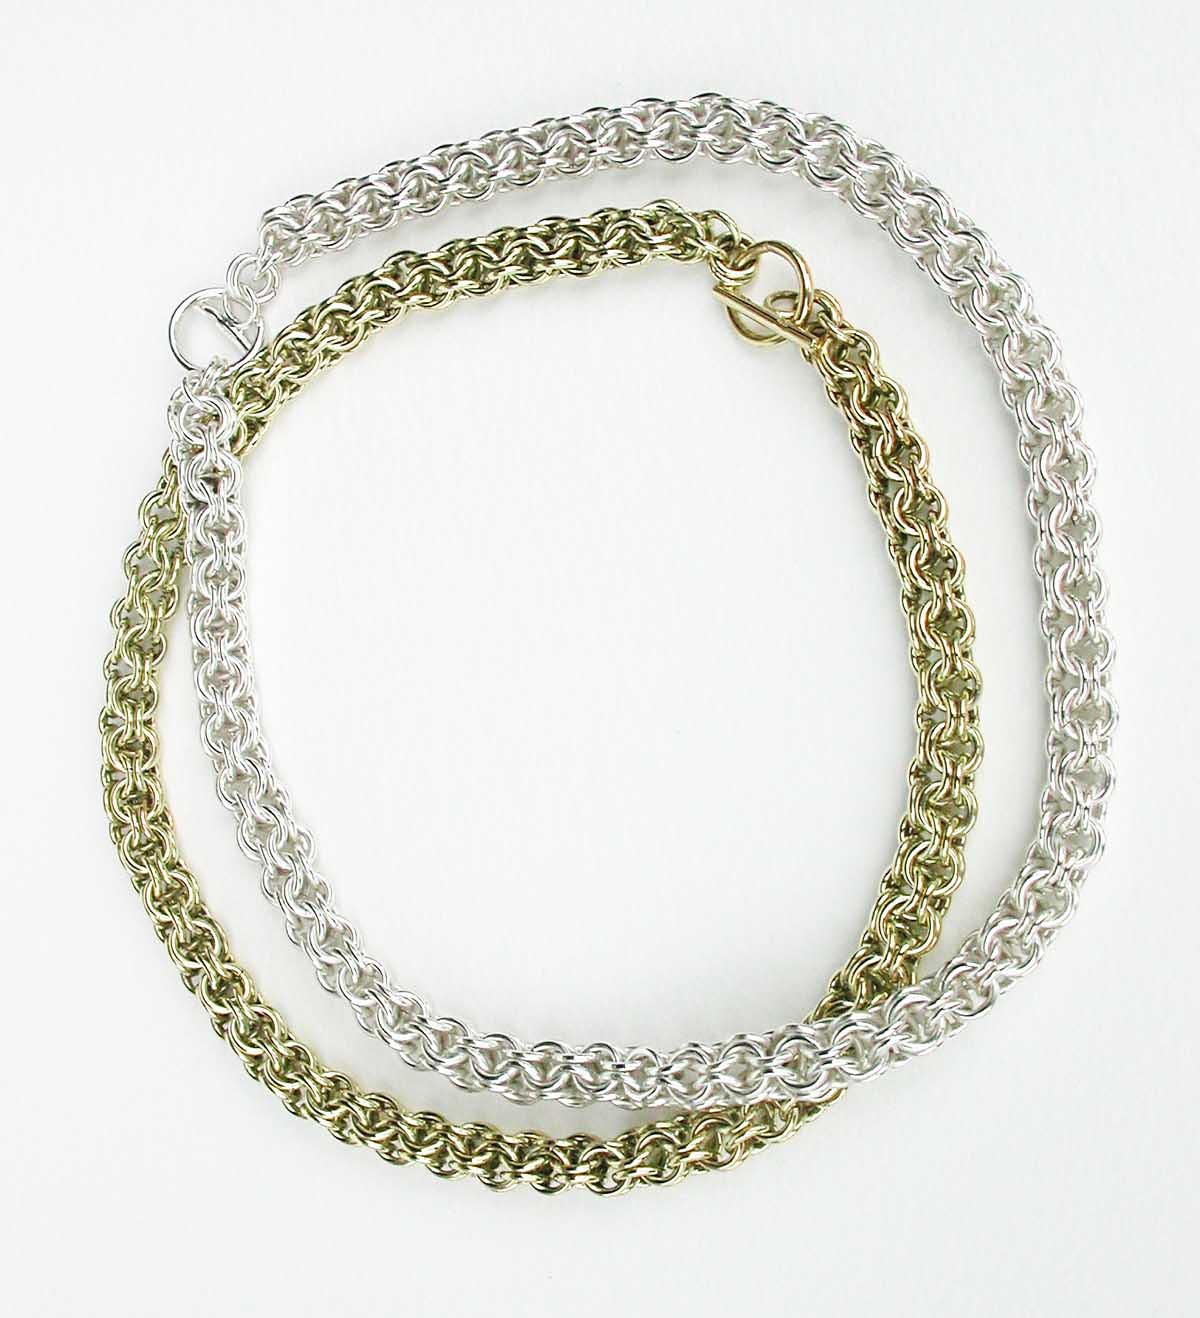 Silver and gold chainmail necklaces